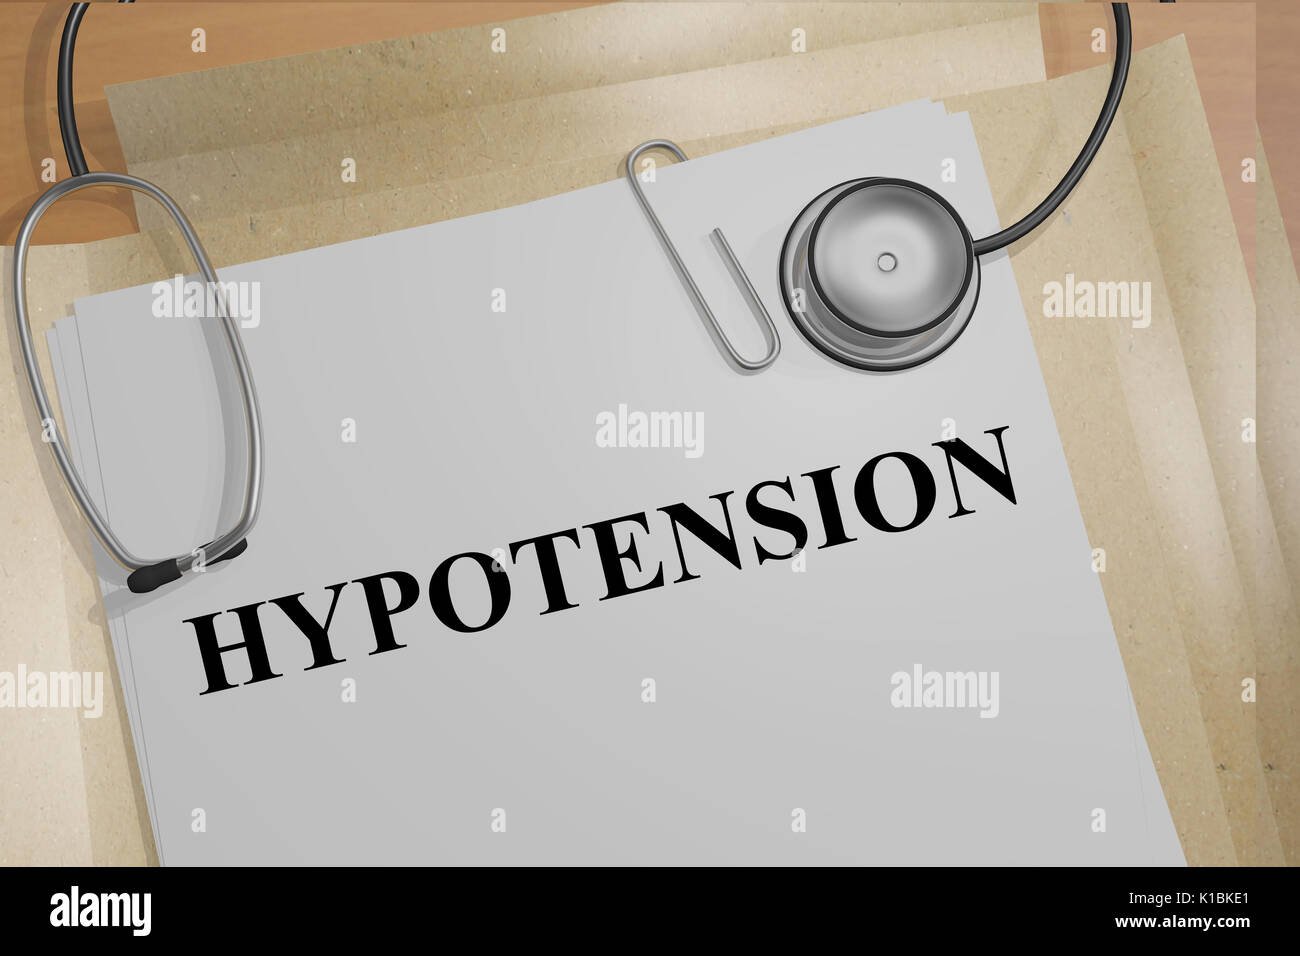 Render illustration of Hypotension title on medical documents Stock Photo